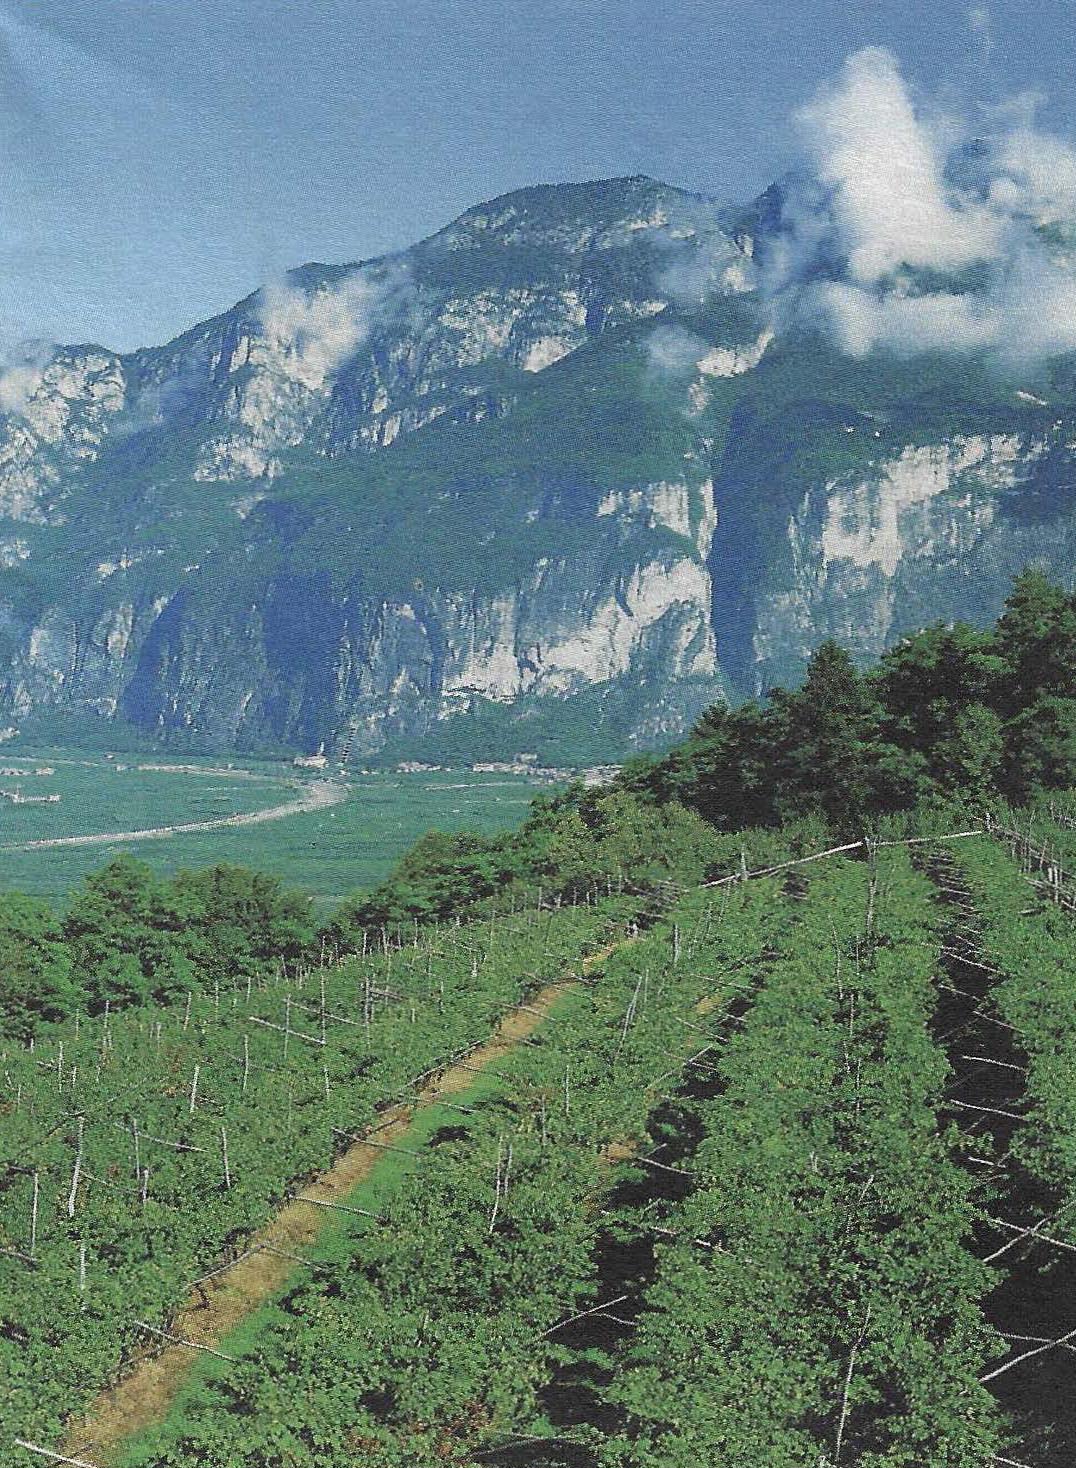 The most beautiful vineyard in Europe